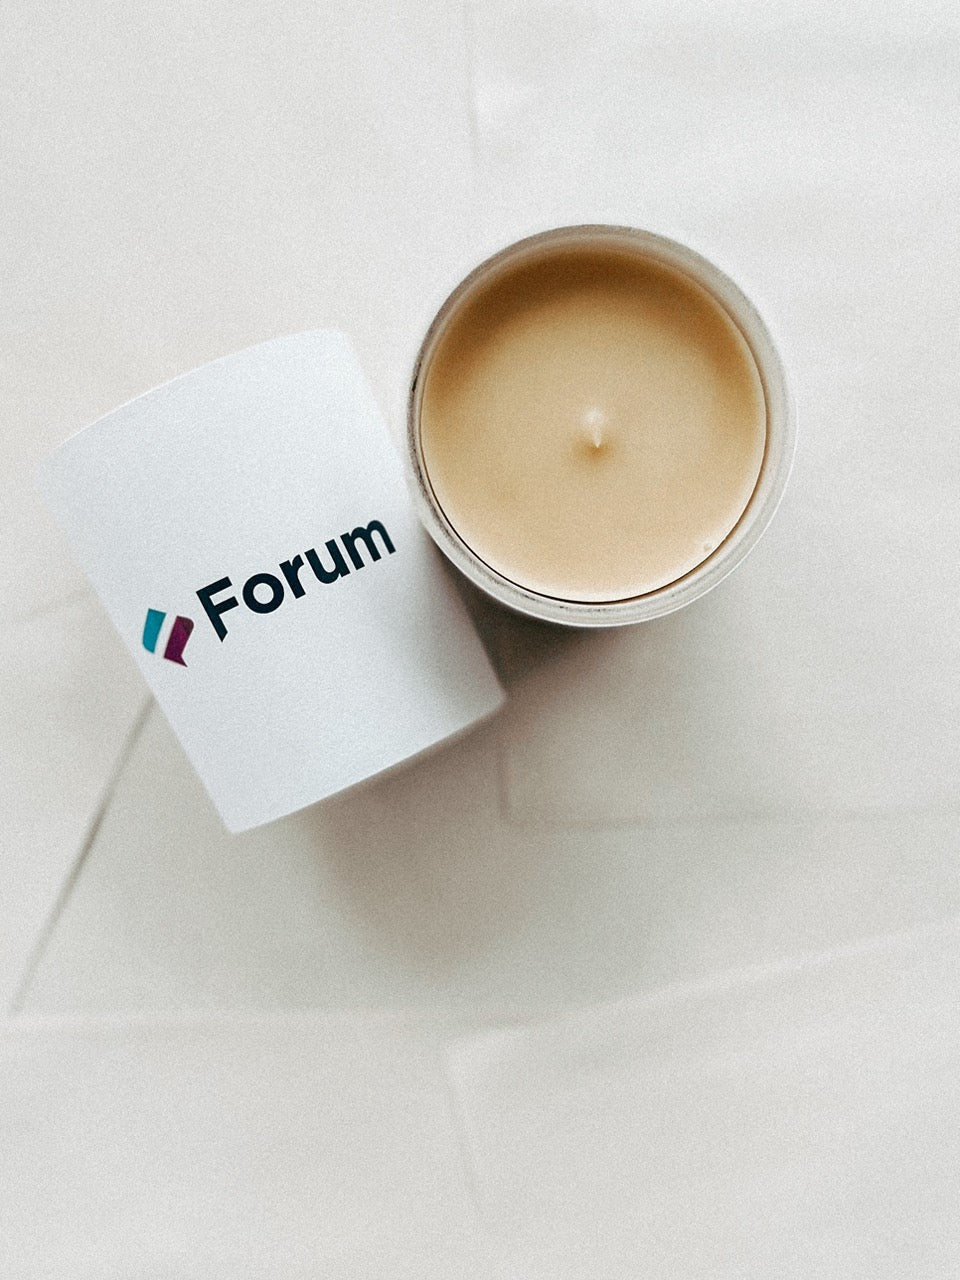 Forum branded candle corporate gifting through hive to home candle co